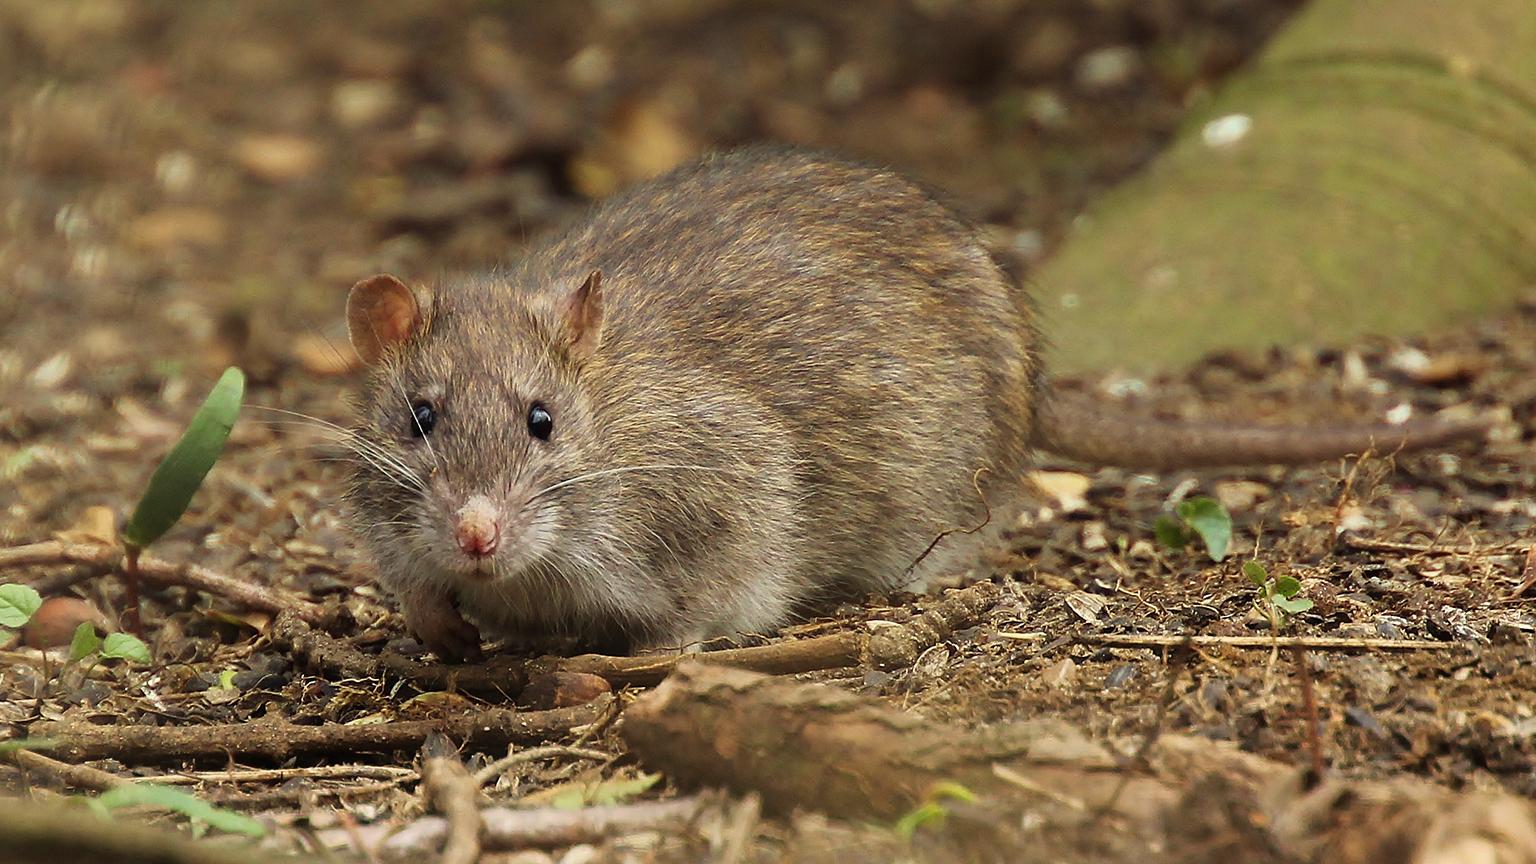 The brown rat (Tony Sutton / Flickr)